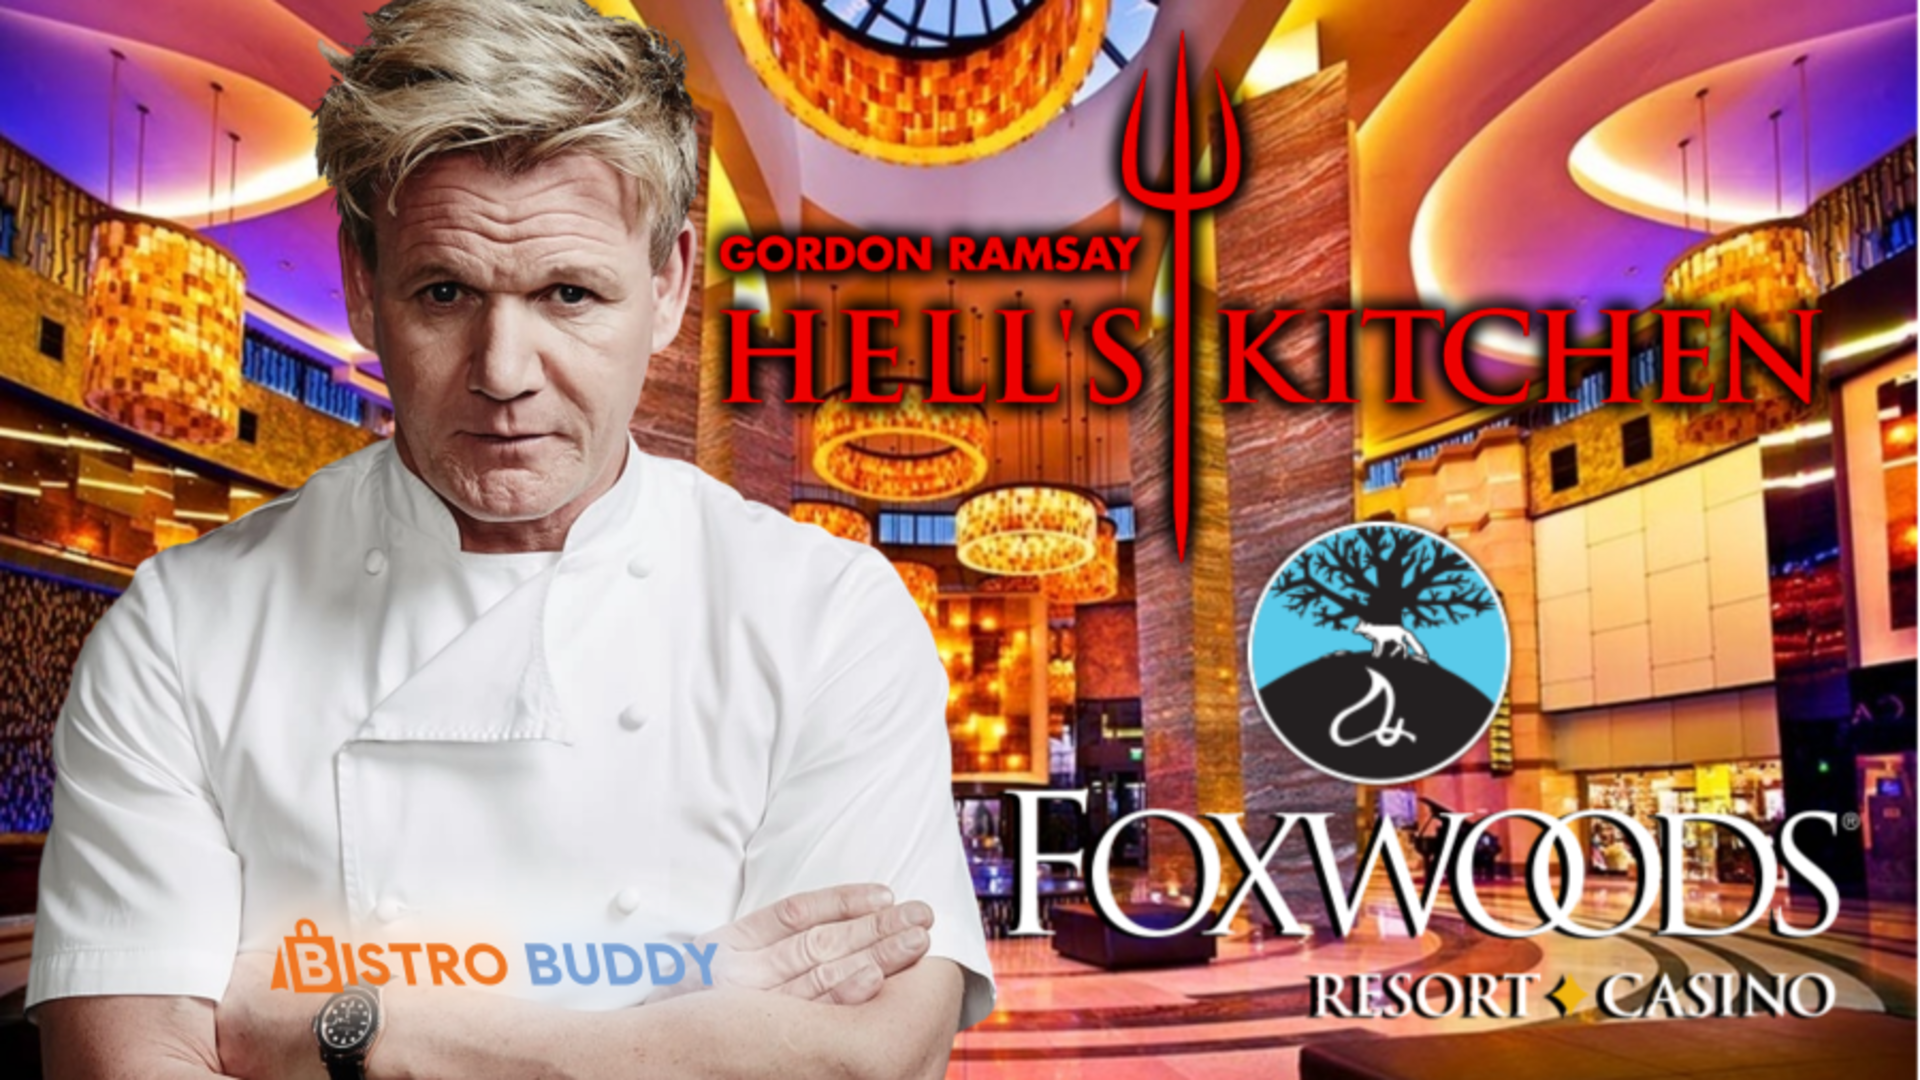 Gordon-Ramsay-Ignites-Connecticuts-Culinary_Scene-with-New-Hells-Kitchen-Restaurant-at-Foxwoods-casino-resorts_9935c Restaurant News | The Latest Buzz from Restaurants - Latest Dining Trends | BISTRO BUDDY | Food & Drink Community Network  Discover and support your local food and drink event scene on the ultimate community platform for foodies and businesses to connect & collaborate!